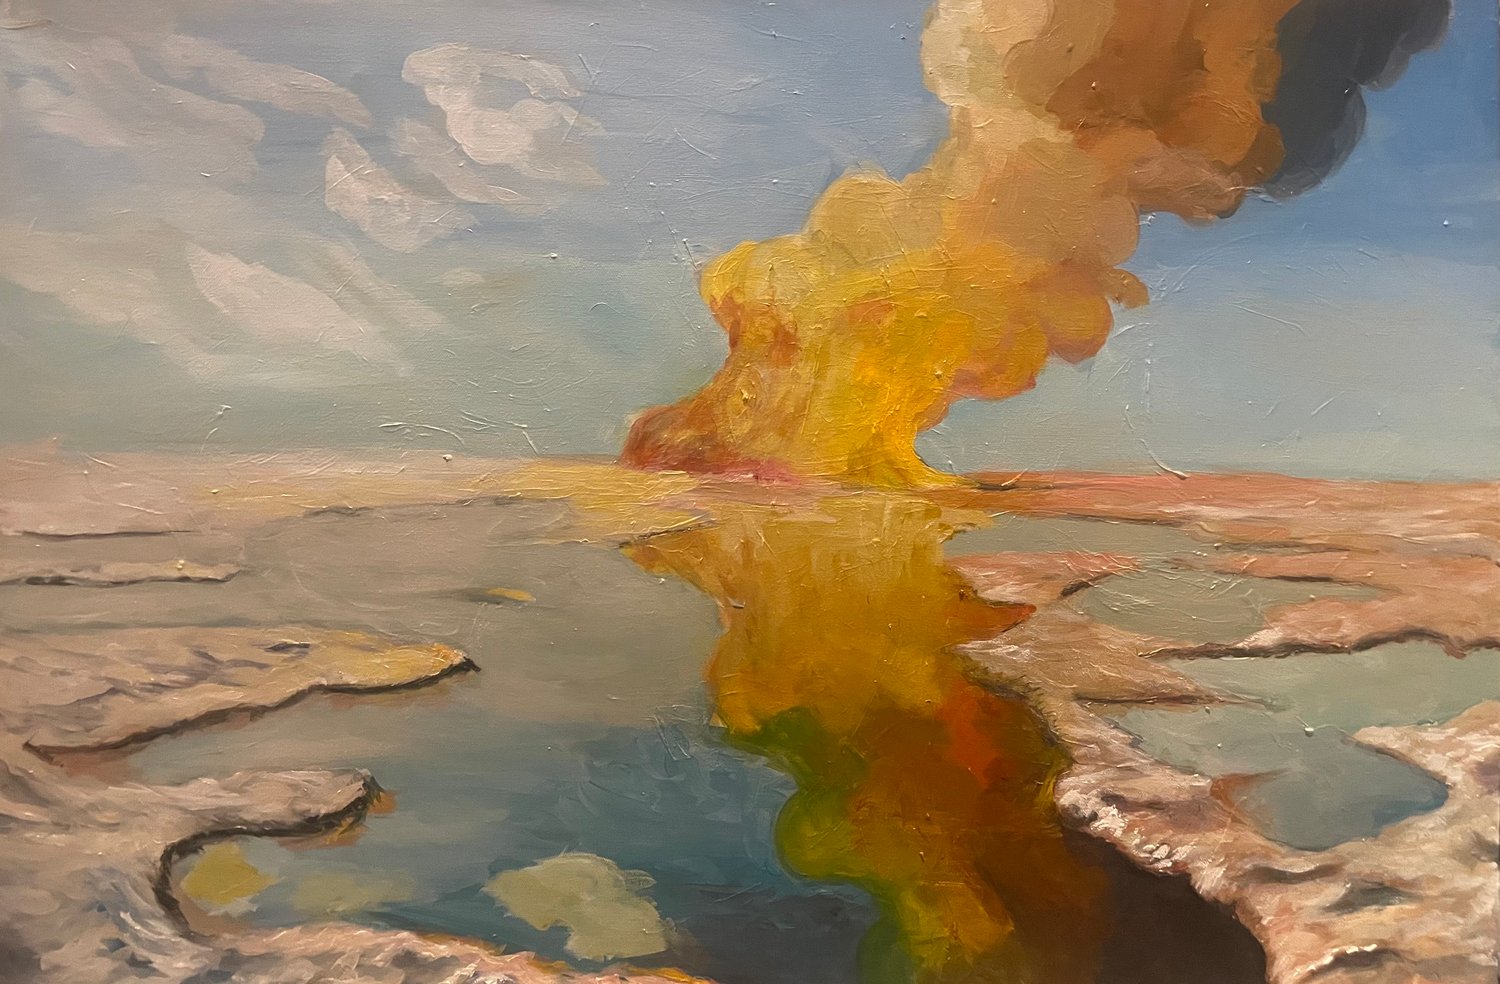 Painting - Watching the arctic burn